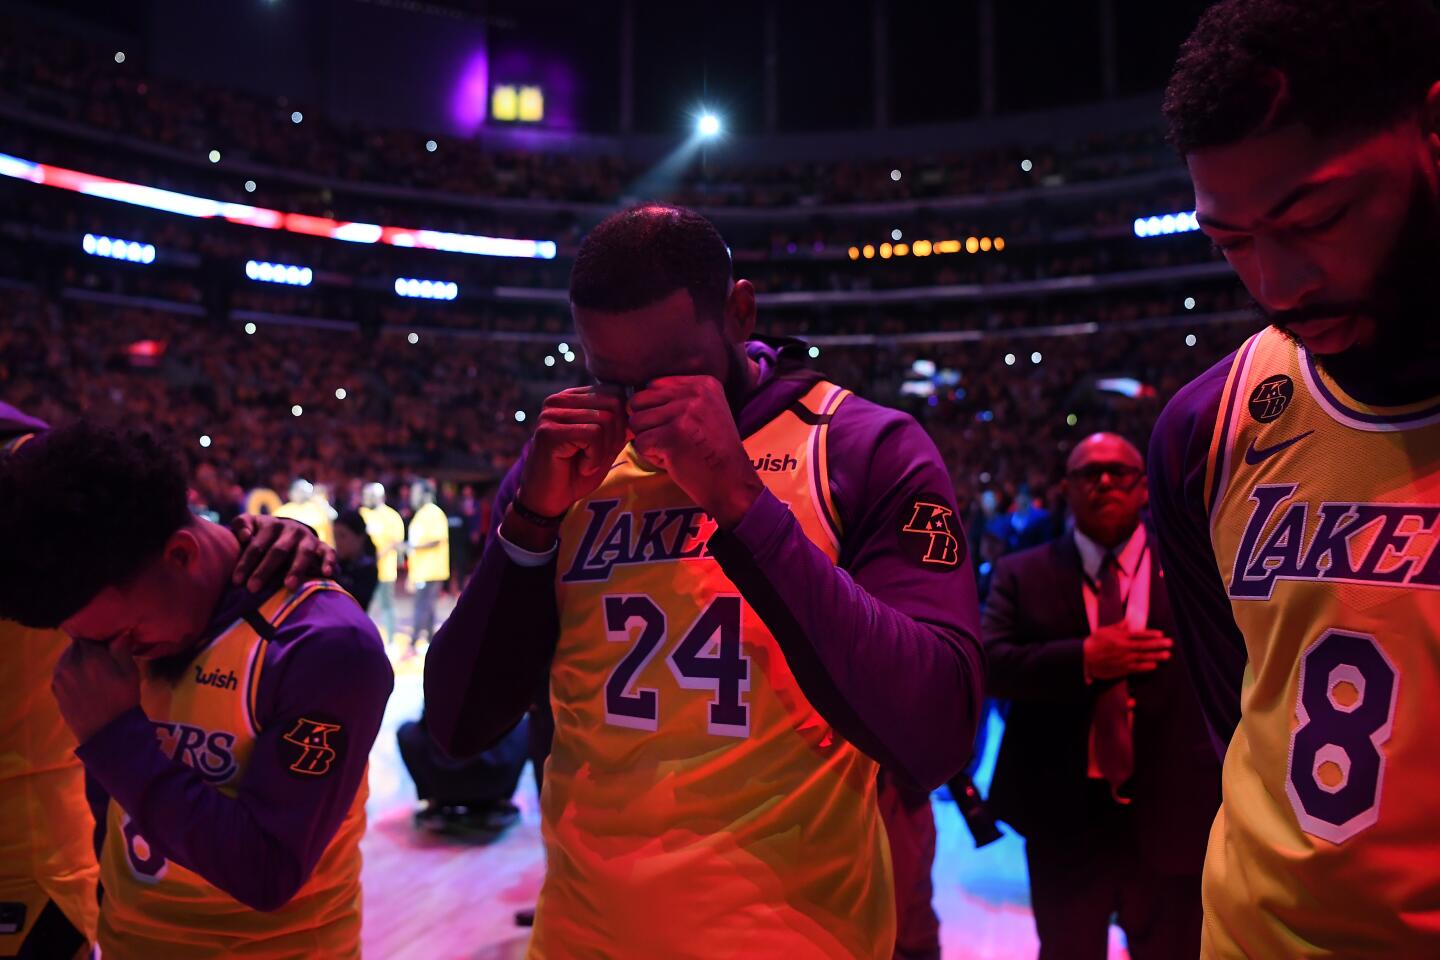 LeBron James and the Lakers honor Kobe Bryant in emotional pregame ceremony